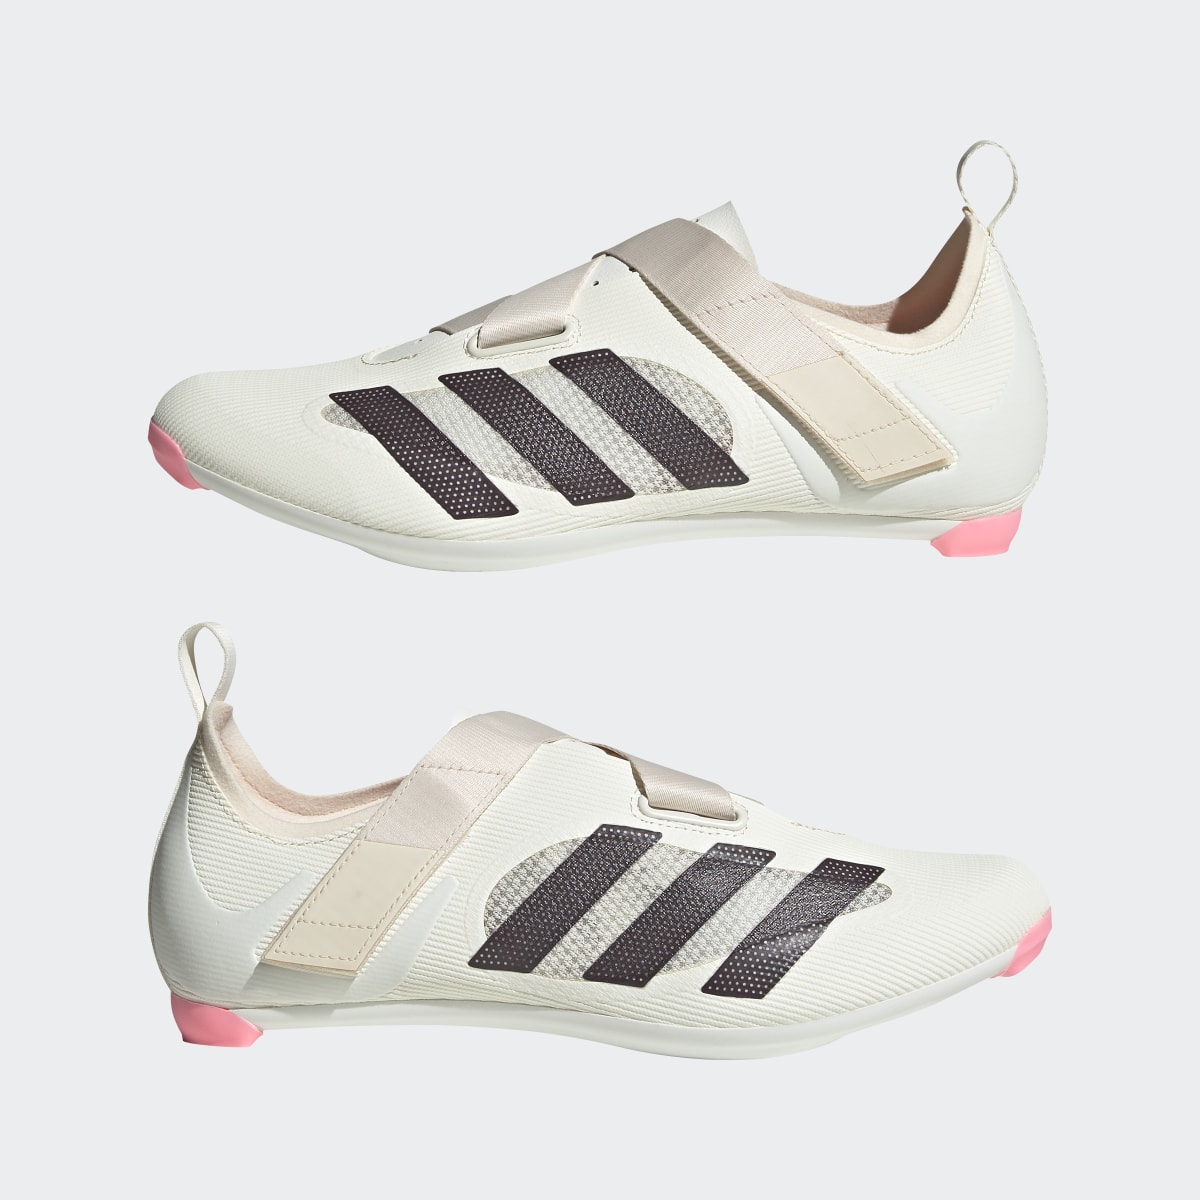 Adidas CHAUSSURE D'INDOOR CYCLING. 8